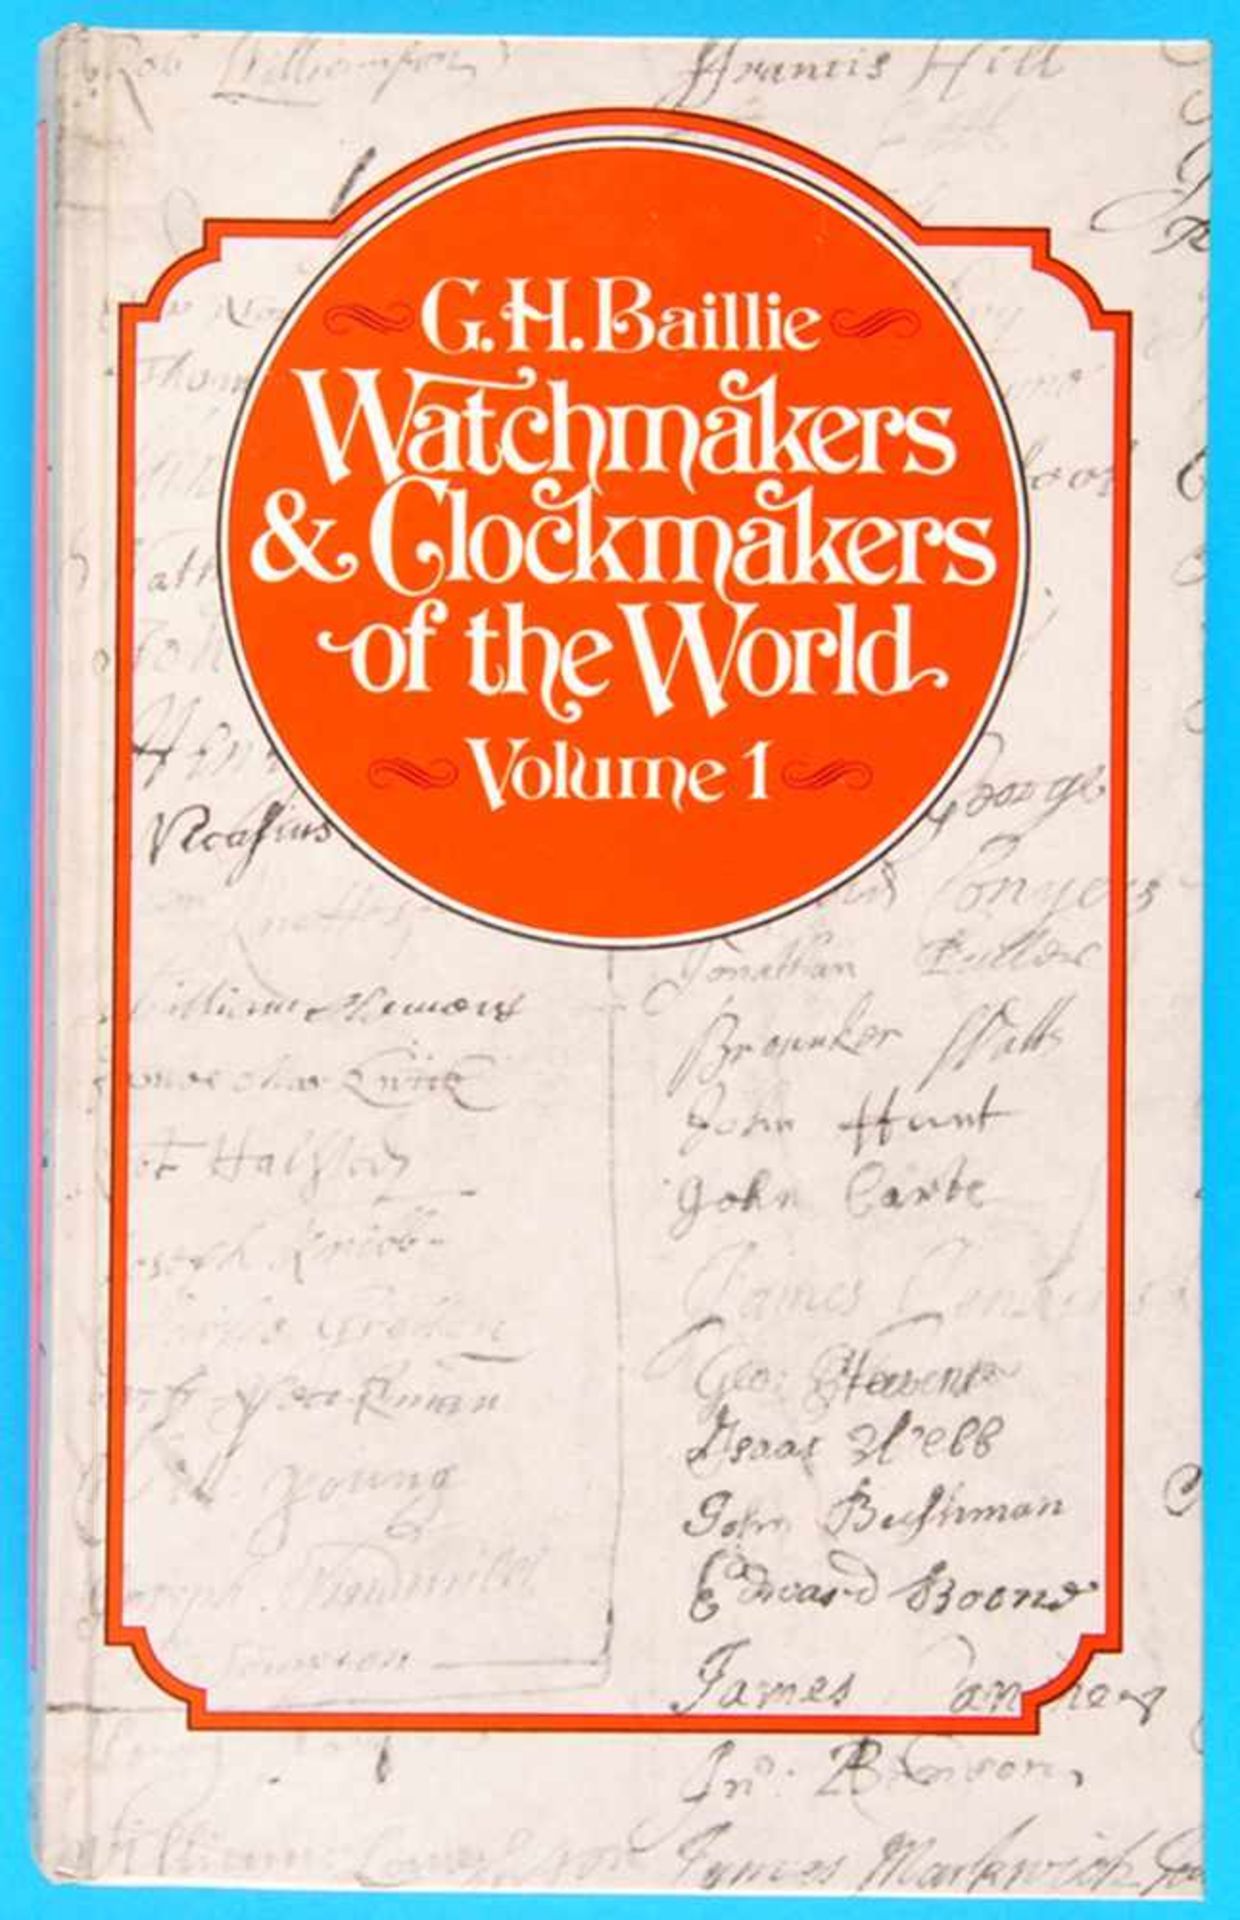 G.H.Baillie, Watchmakers & Clockmakers of the World, Volume 1G.H.Baillie, Watchmakers &